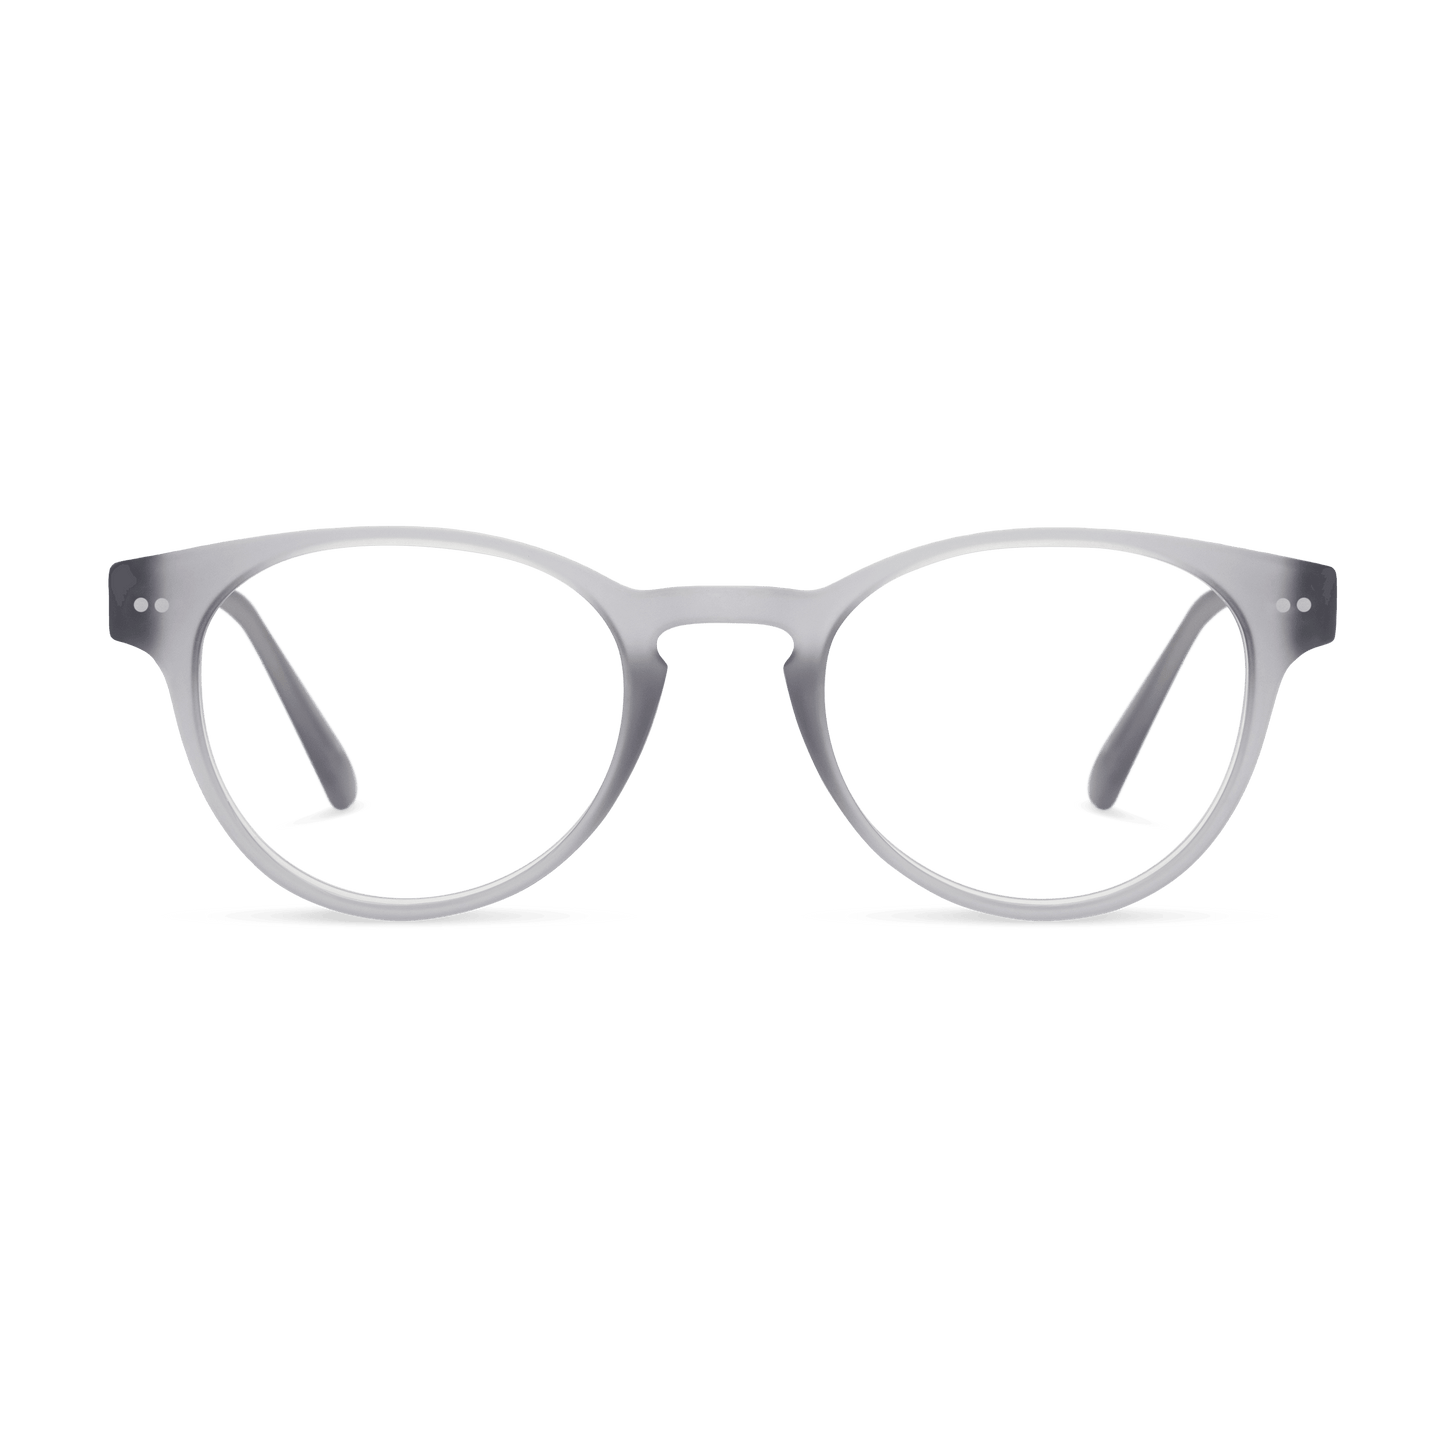 Abbey Readers READING GLASSES LOOK OPTIC Grey +1.00 